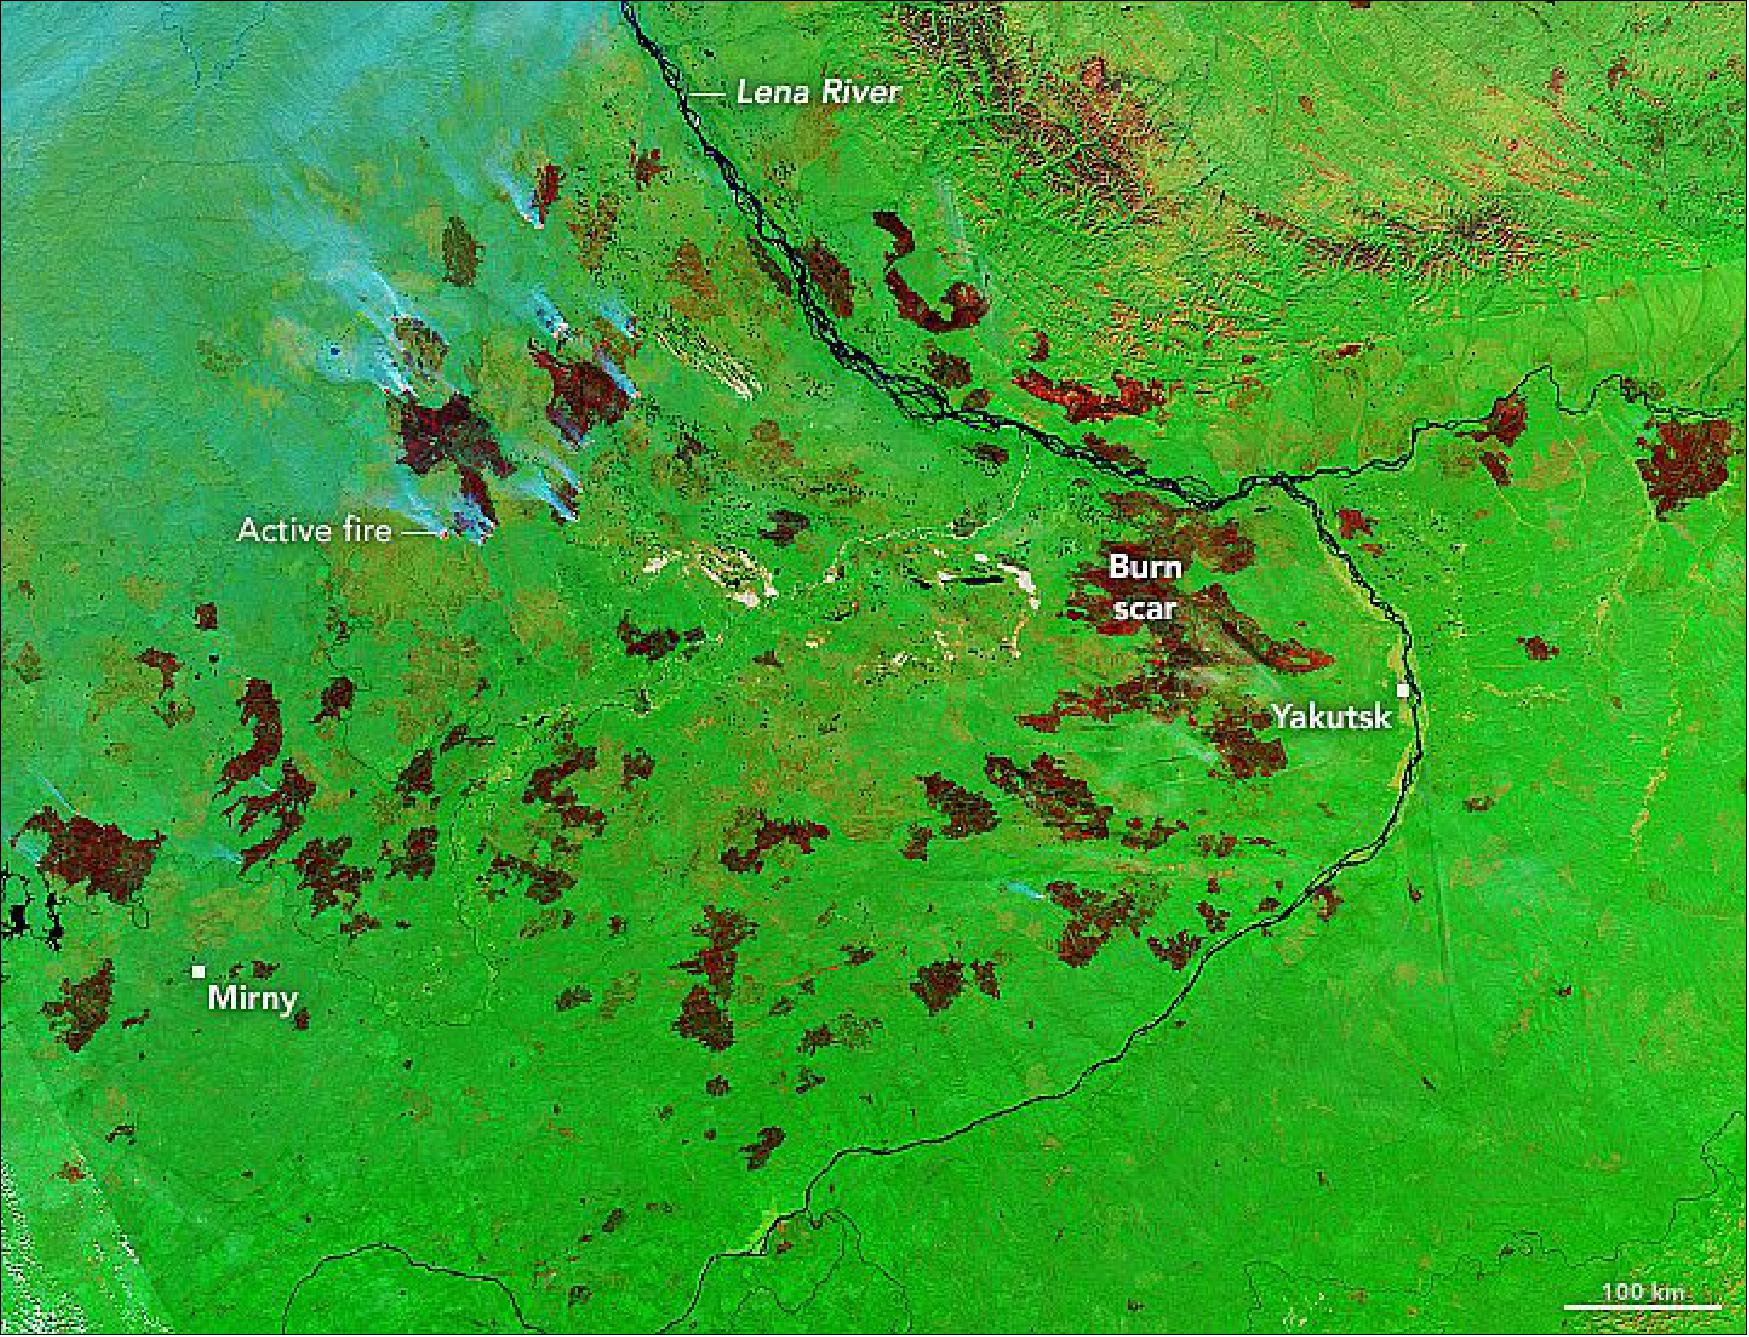 Figure 34: Fires burned 8.4 million hectares (84,000 km2) in the eastern Russian republic. In this false-color satellite image, burned areas appear dark brown. Unburned areas are green. Patches of green within burn scars are fire refugia—areas within fire perimeters that were unburned or only lightly burned. The Visible Infrared Imaging Radiometer Suite (VIIRS) on the Suomi NPP satellite captured the image on September 10, 2021 (image credit: NASA Earth Observatory image by Lauren Dauphin, using MODIS data from NASA EOSDIS LANCE and GIBS/Worldview. Story by Adam Voiland)